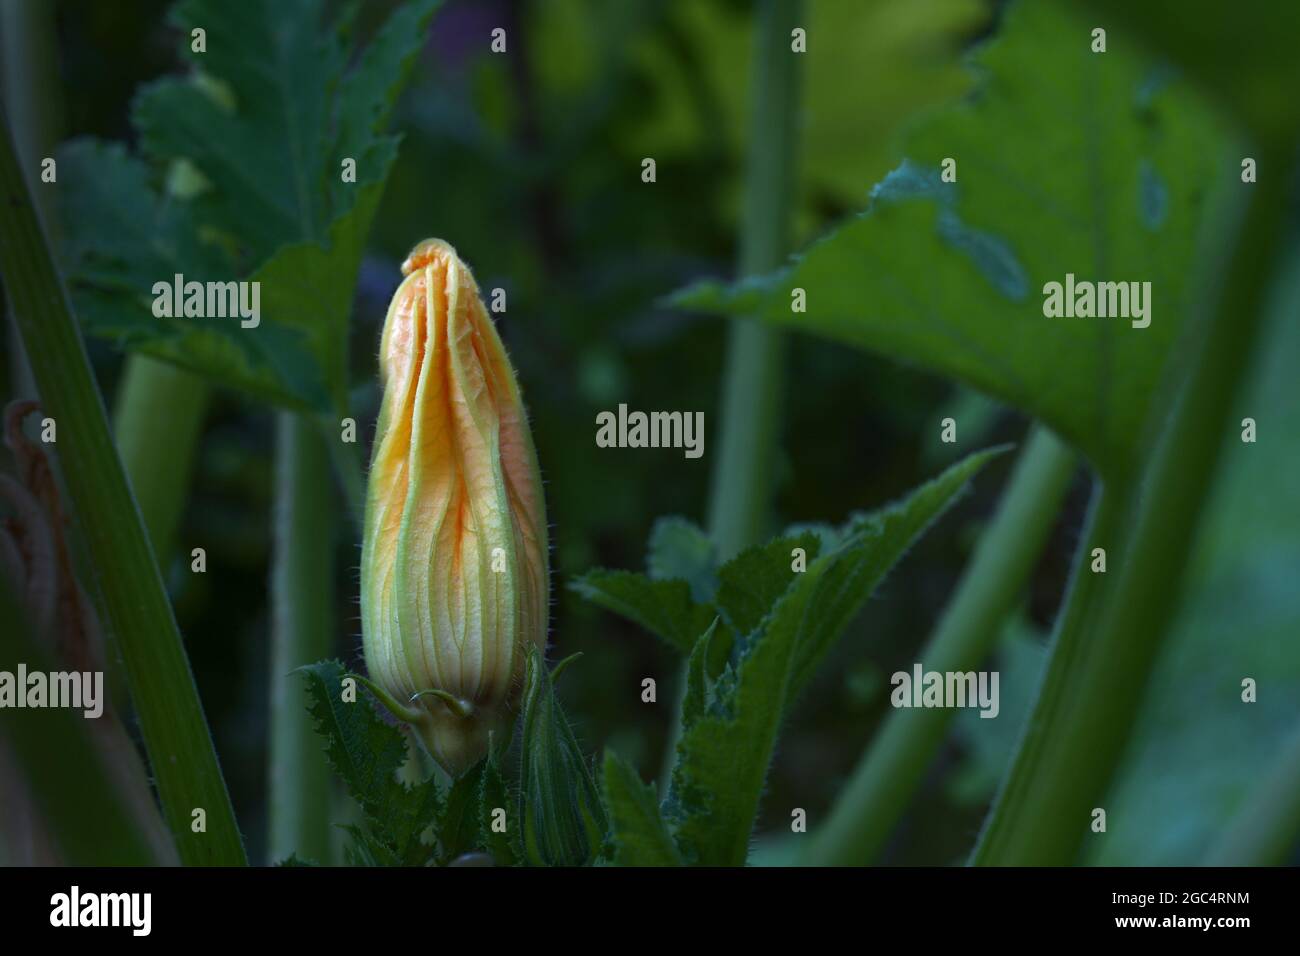 Zucchini or courgette flower on the plant in a vegetable patch, background from dark green leaves, copy space, selected focus, narrow depth of field Stock Photo